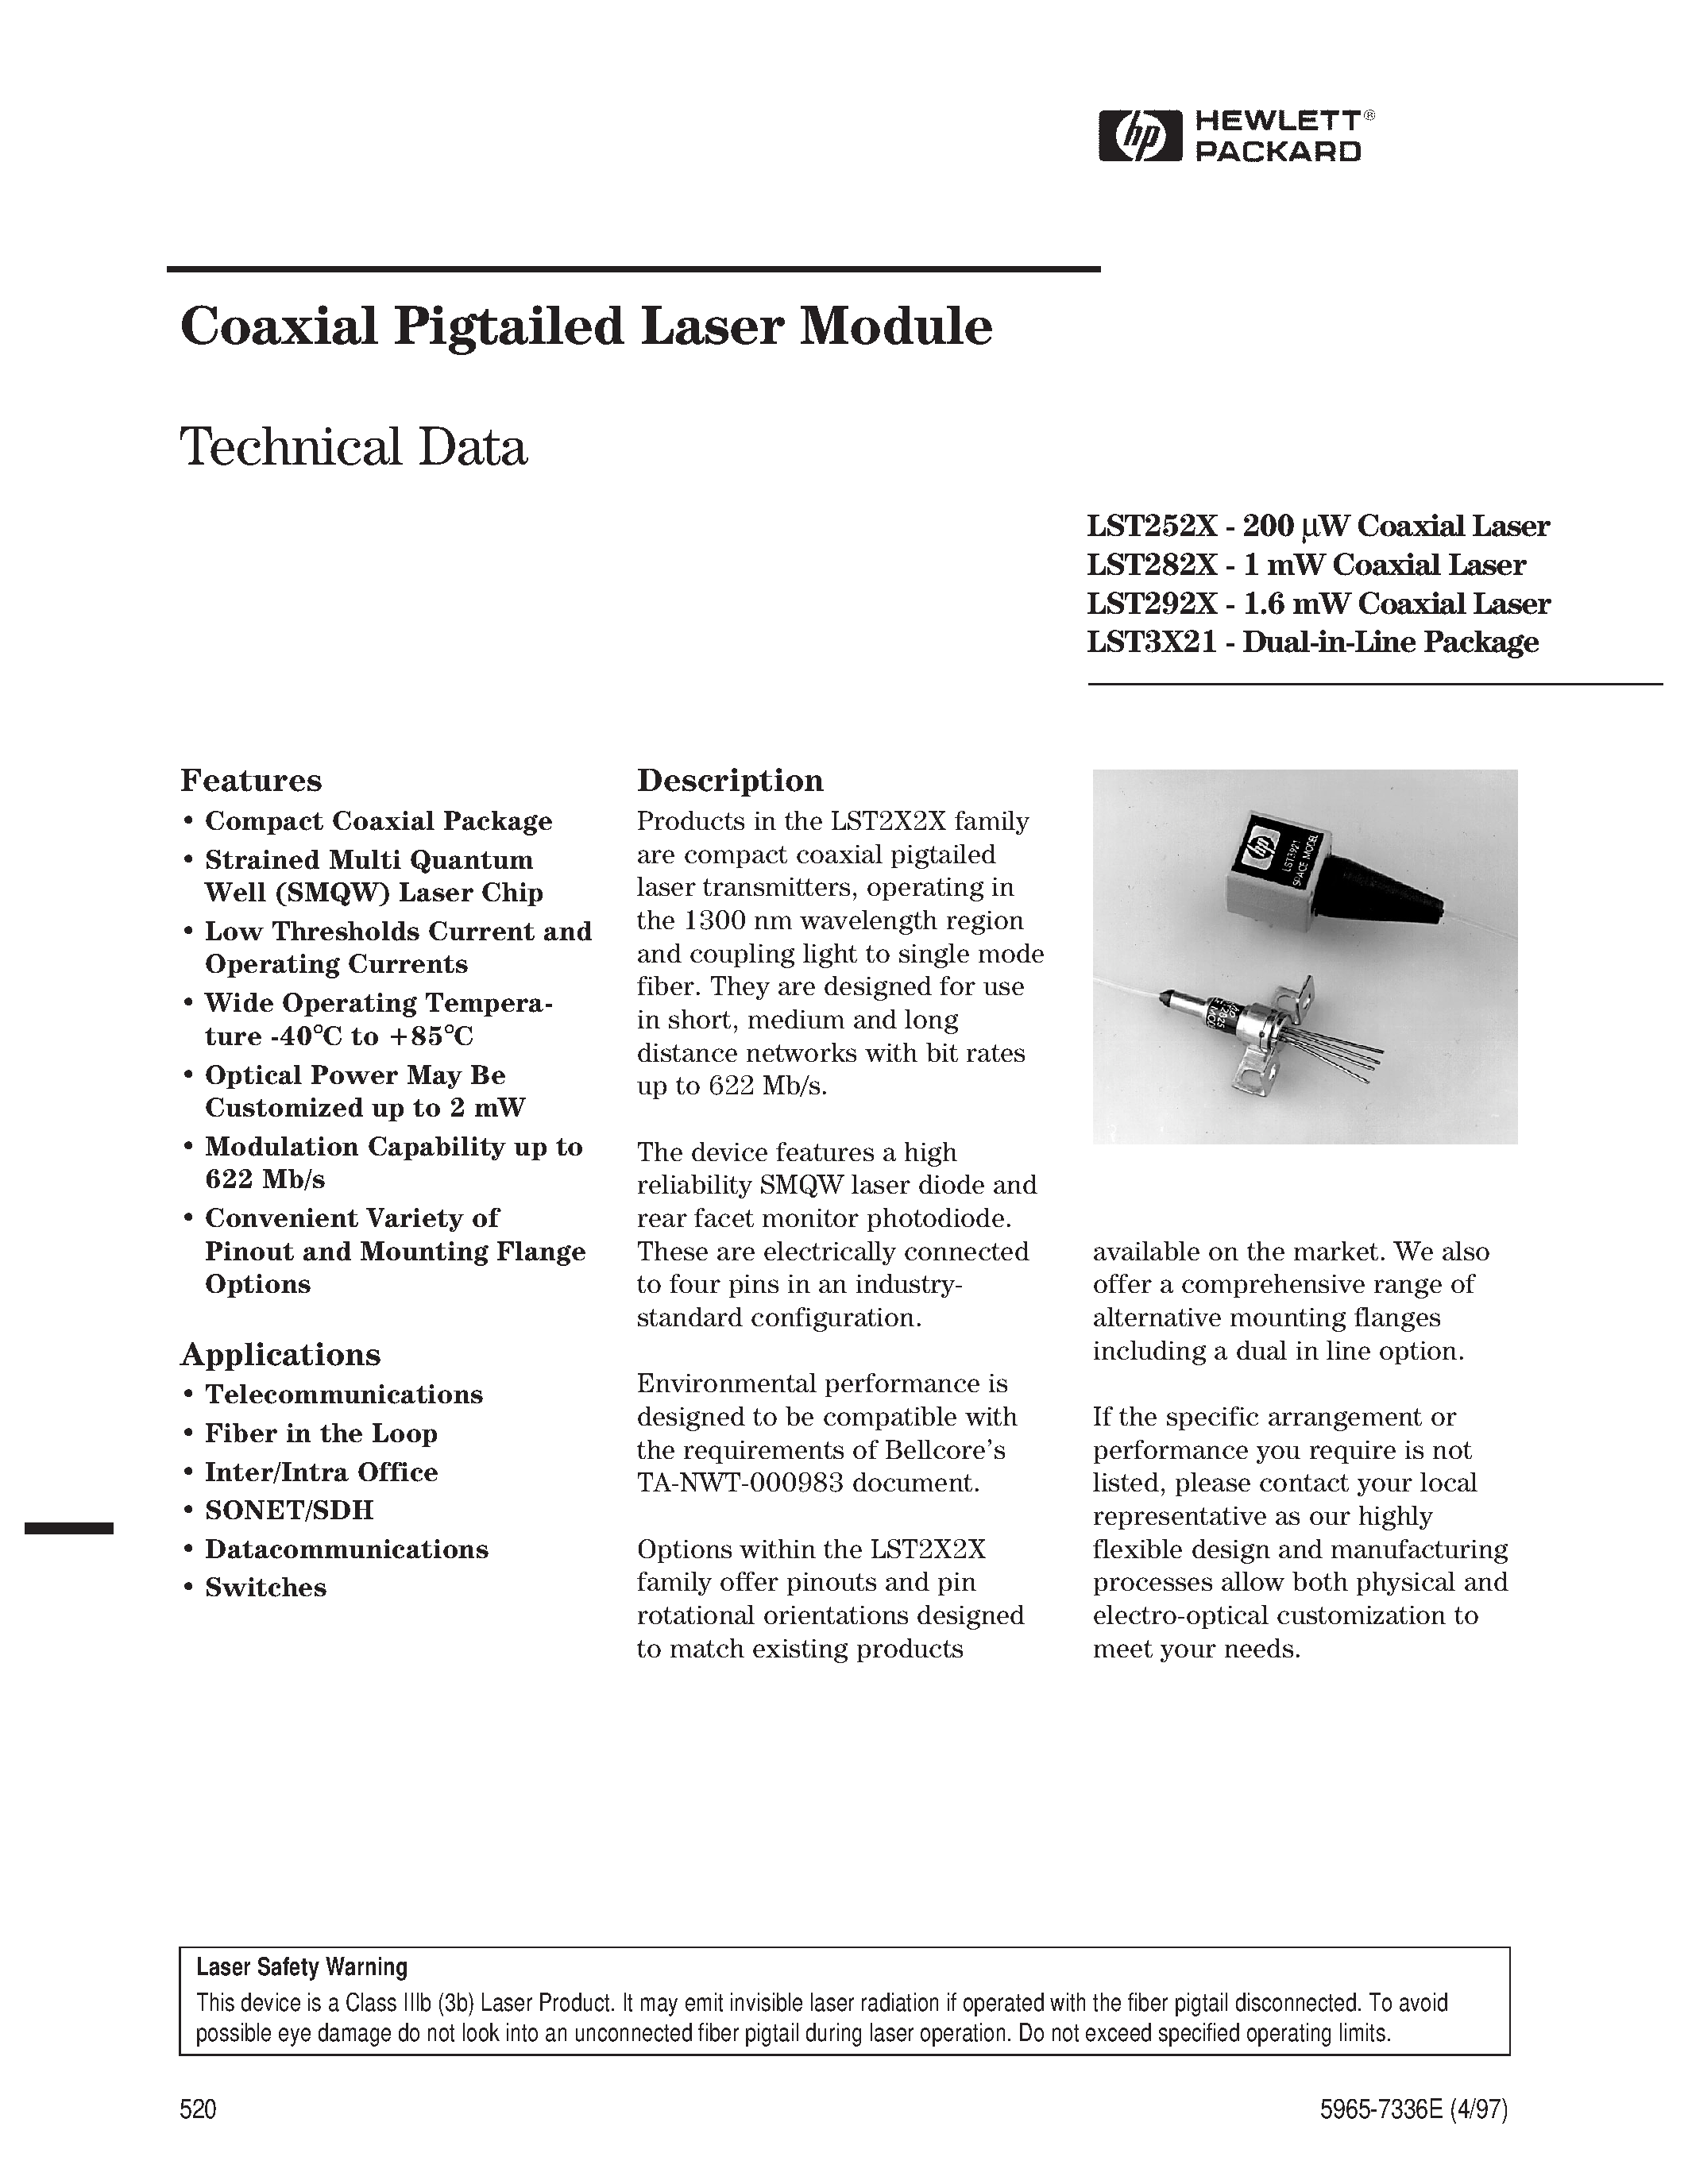 Даташит LST2525-S4-T-ST - Coaxial Pigtailed Laser Module страница 1